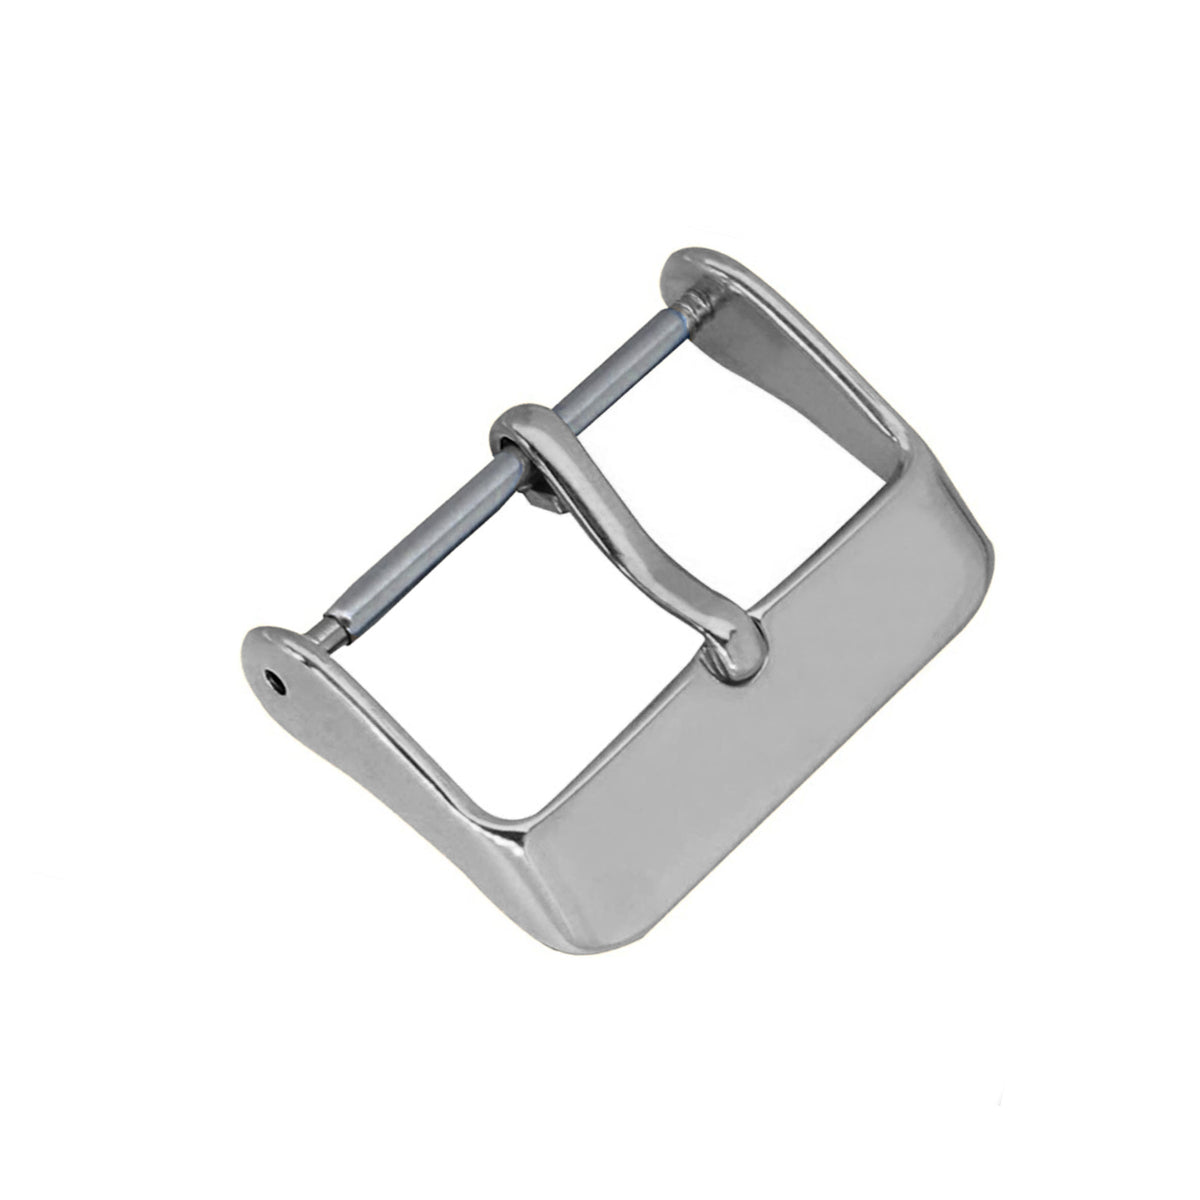 <transcy>8mm to 20mm Chrome Silver - Buckle - 1.75mm tongue - Rounded and deeper front profile -</transcy>